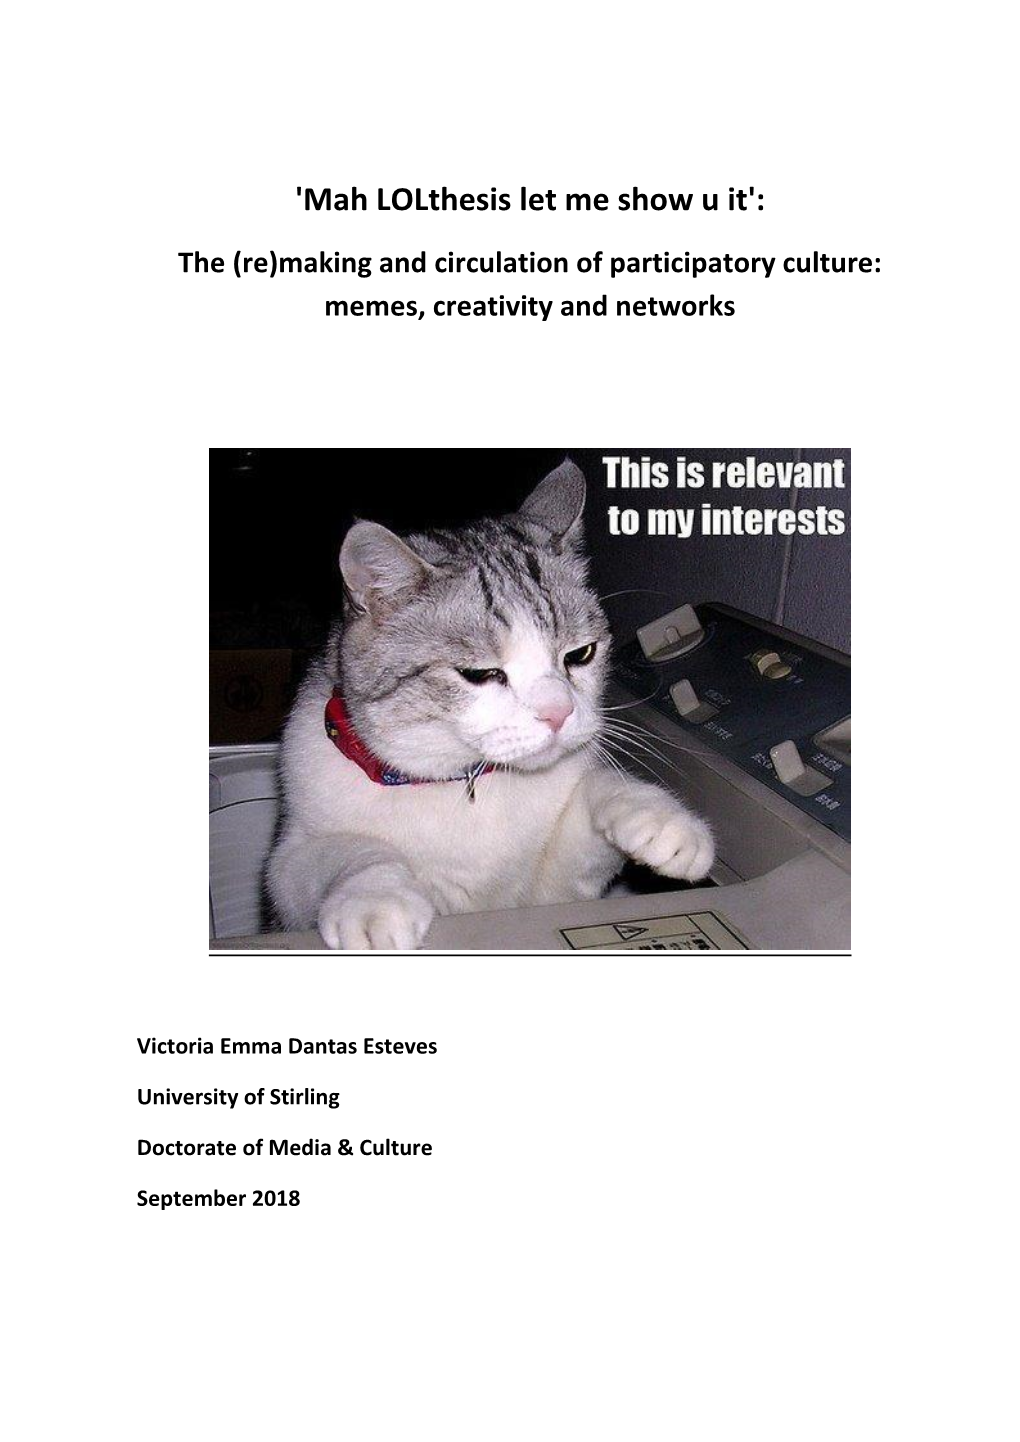 'Mah Lolthesis Let Me Show U It': the (Re)Making and Circulation of Participatory Culture: Memes, Creativity and Networks